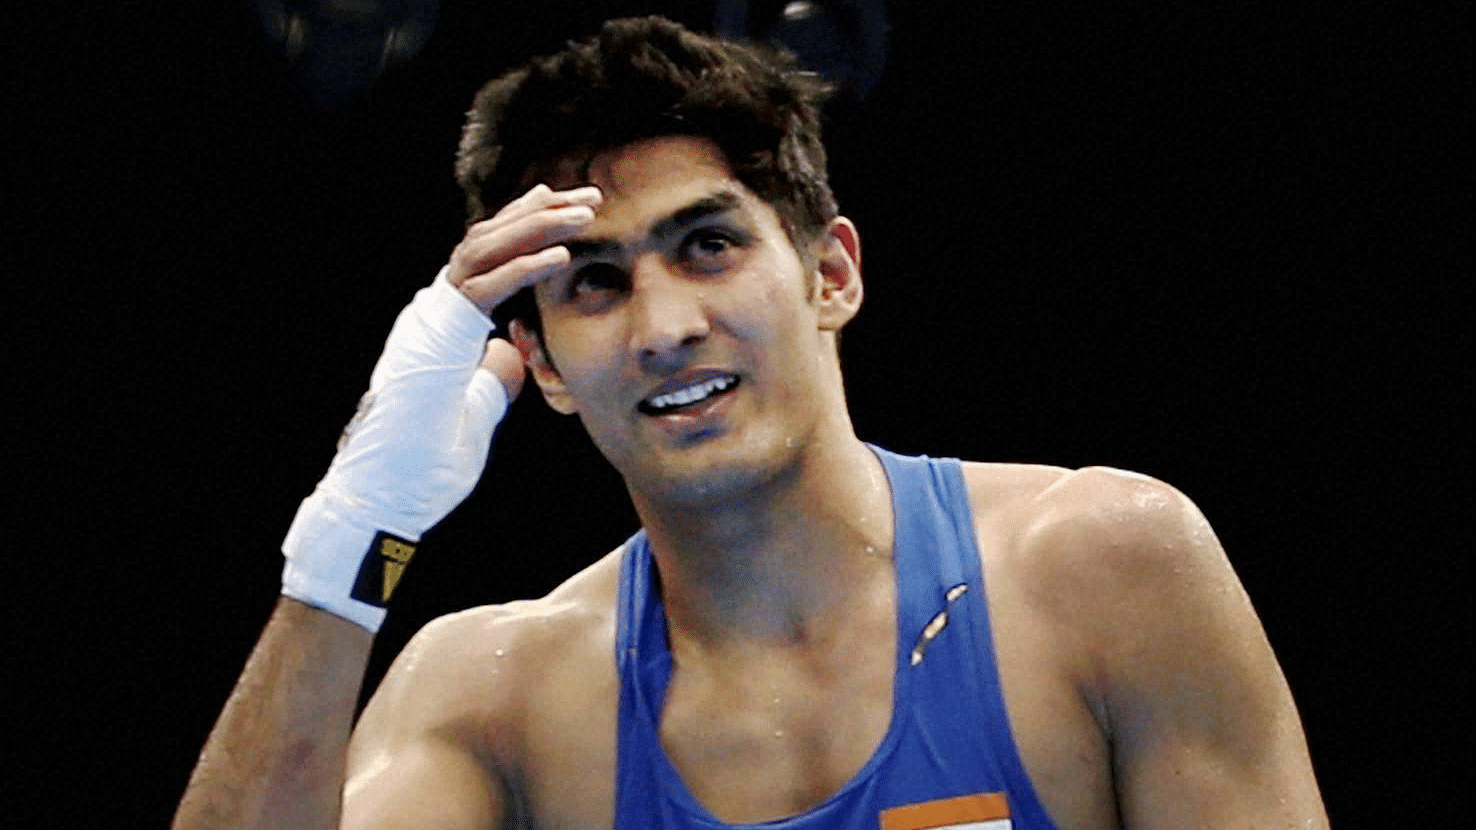 Vijender became the first Indian boxer to win an Olympic medal at the 2008 Beijing Olympics